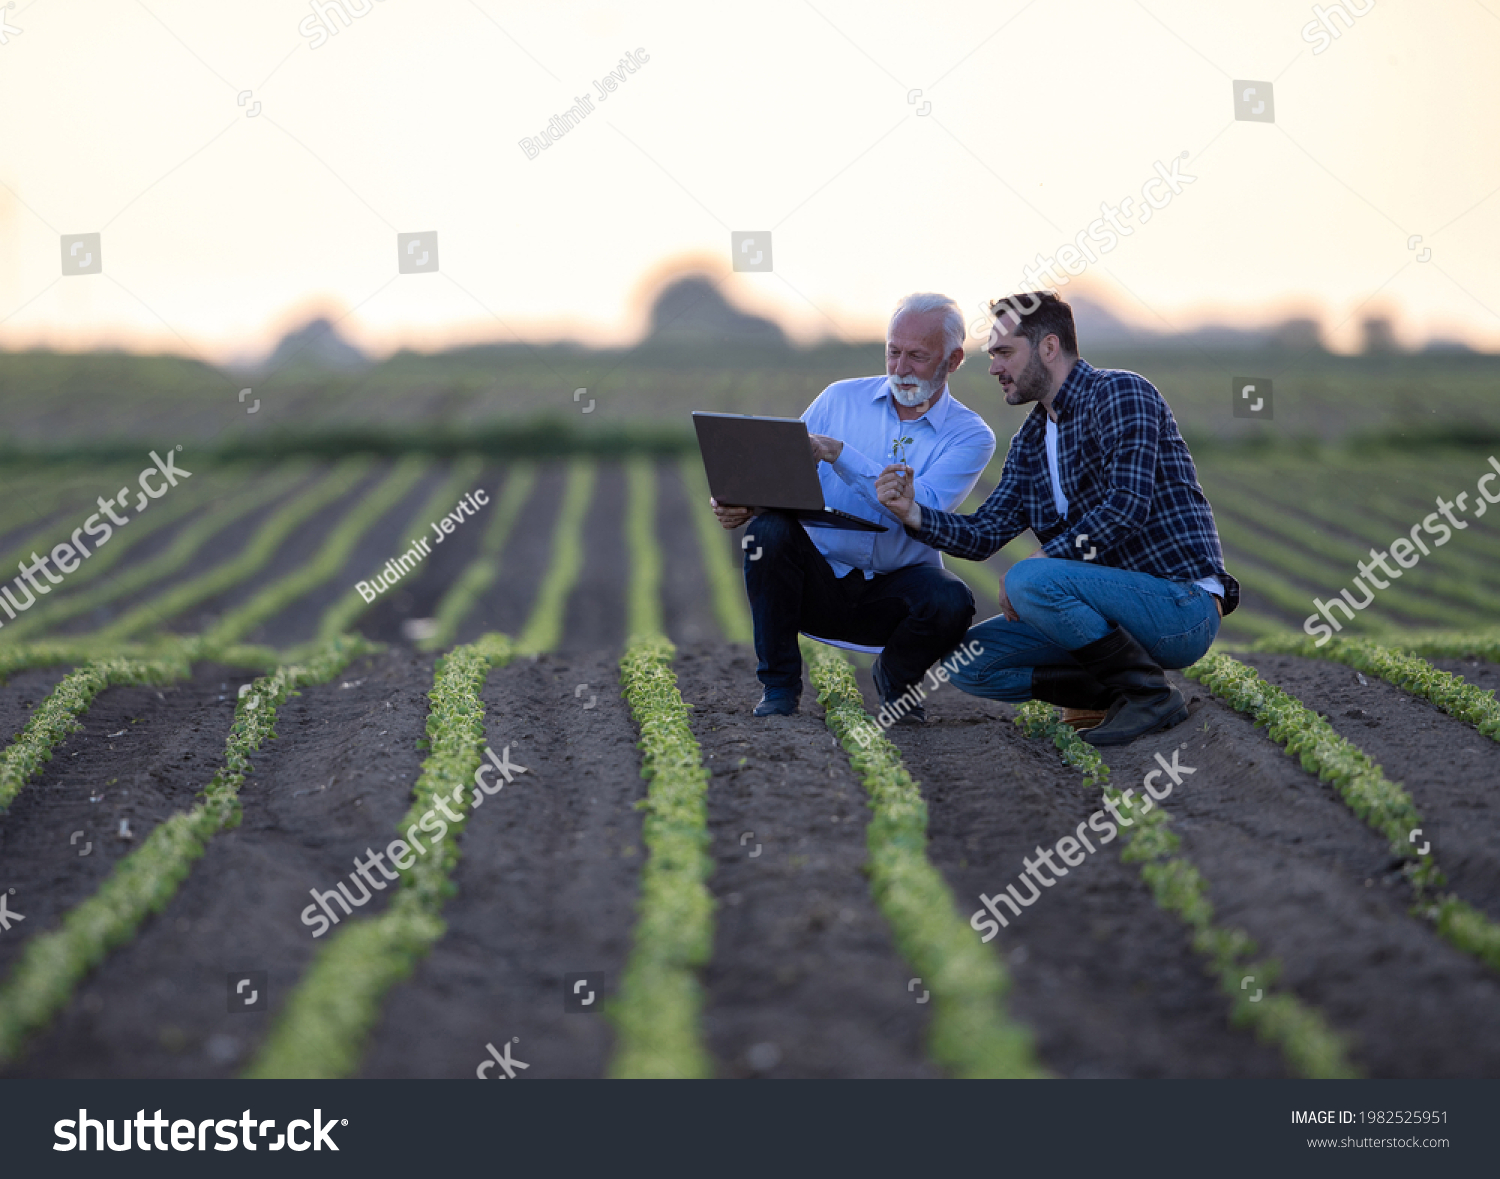 Two men crouching in soy field using computer. Farmer and businessman looking at sprout, pointing explaining using modern technology computer in agriculture.  #1982525951